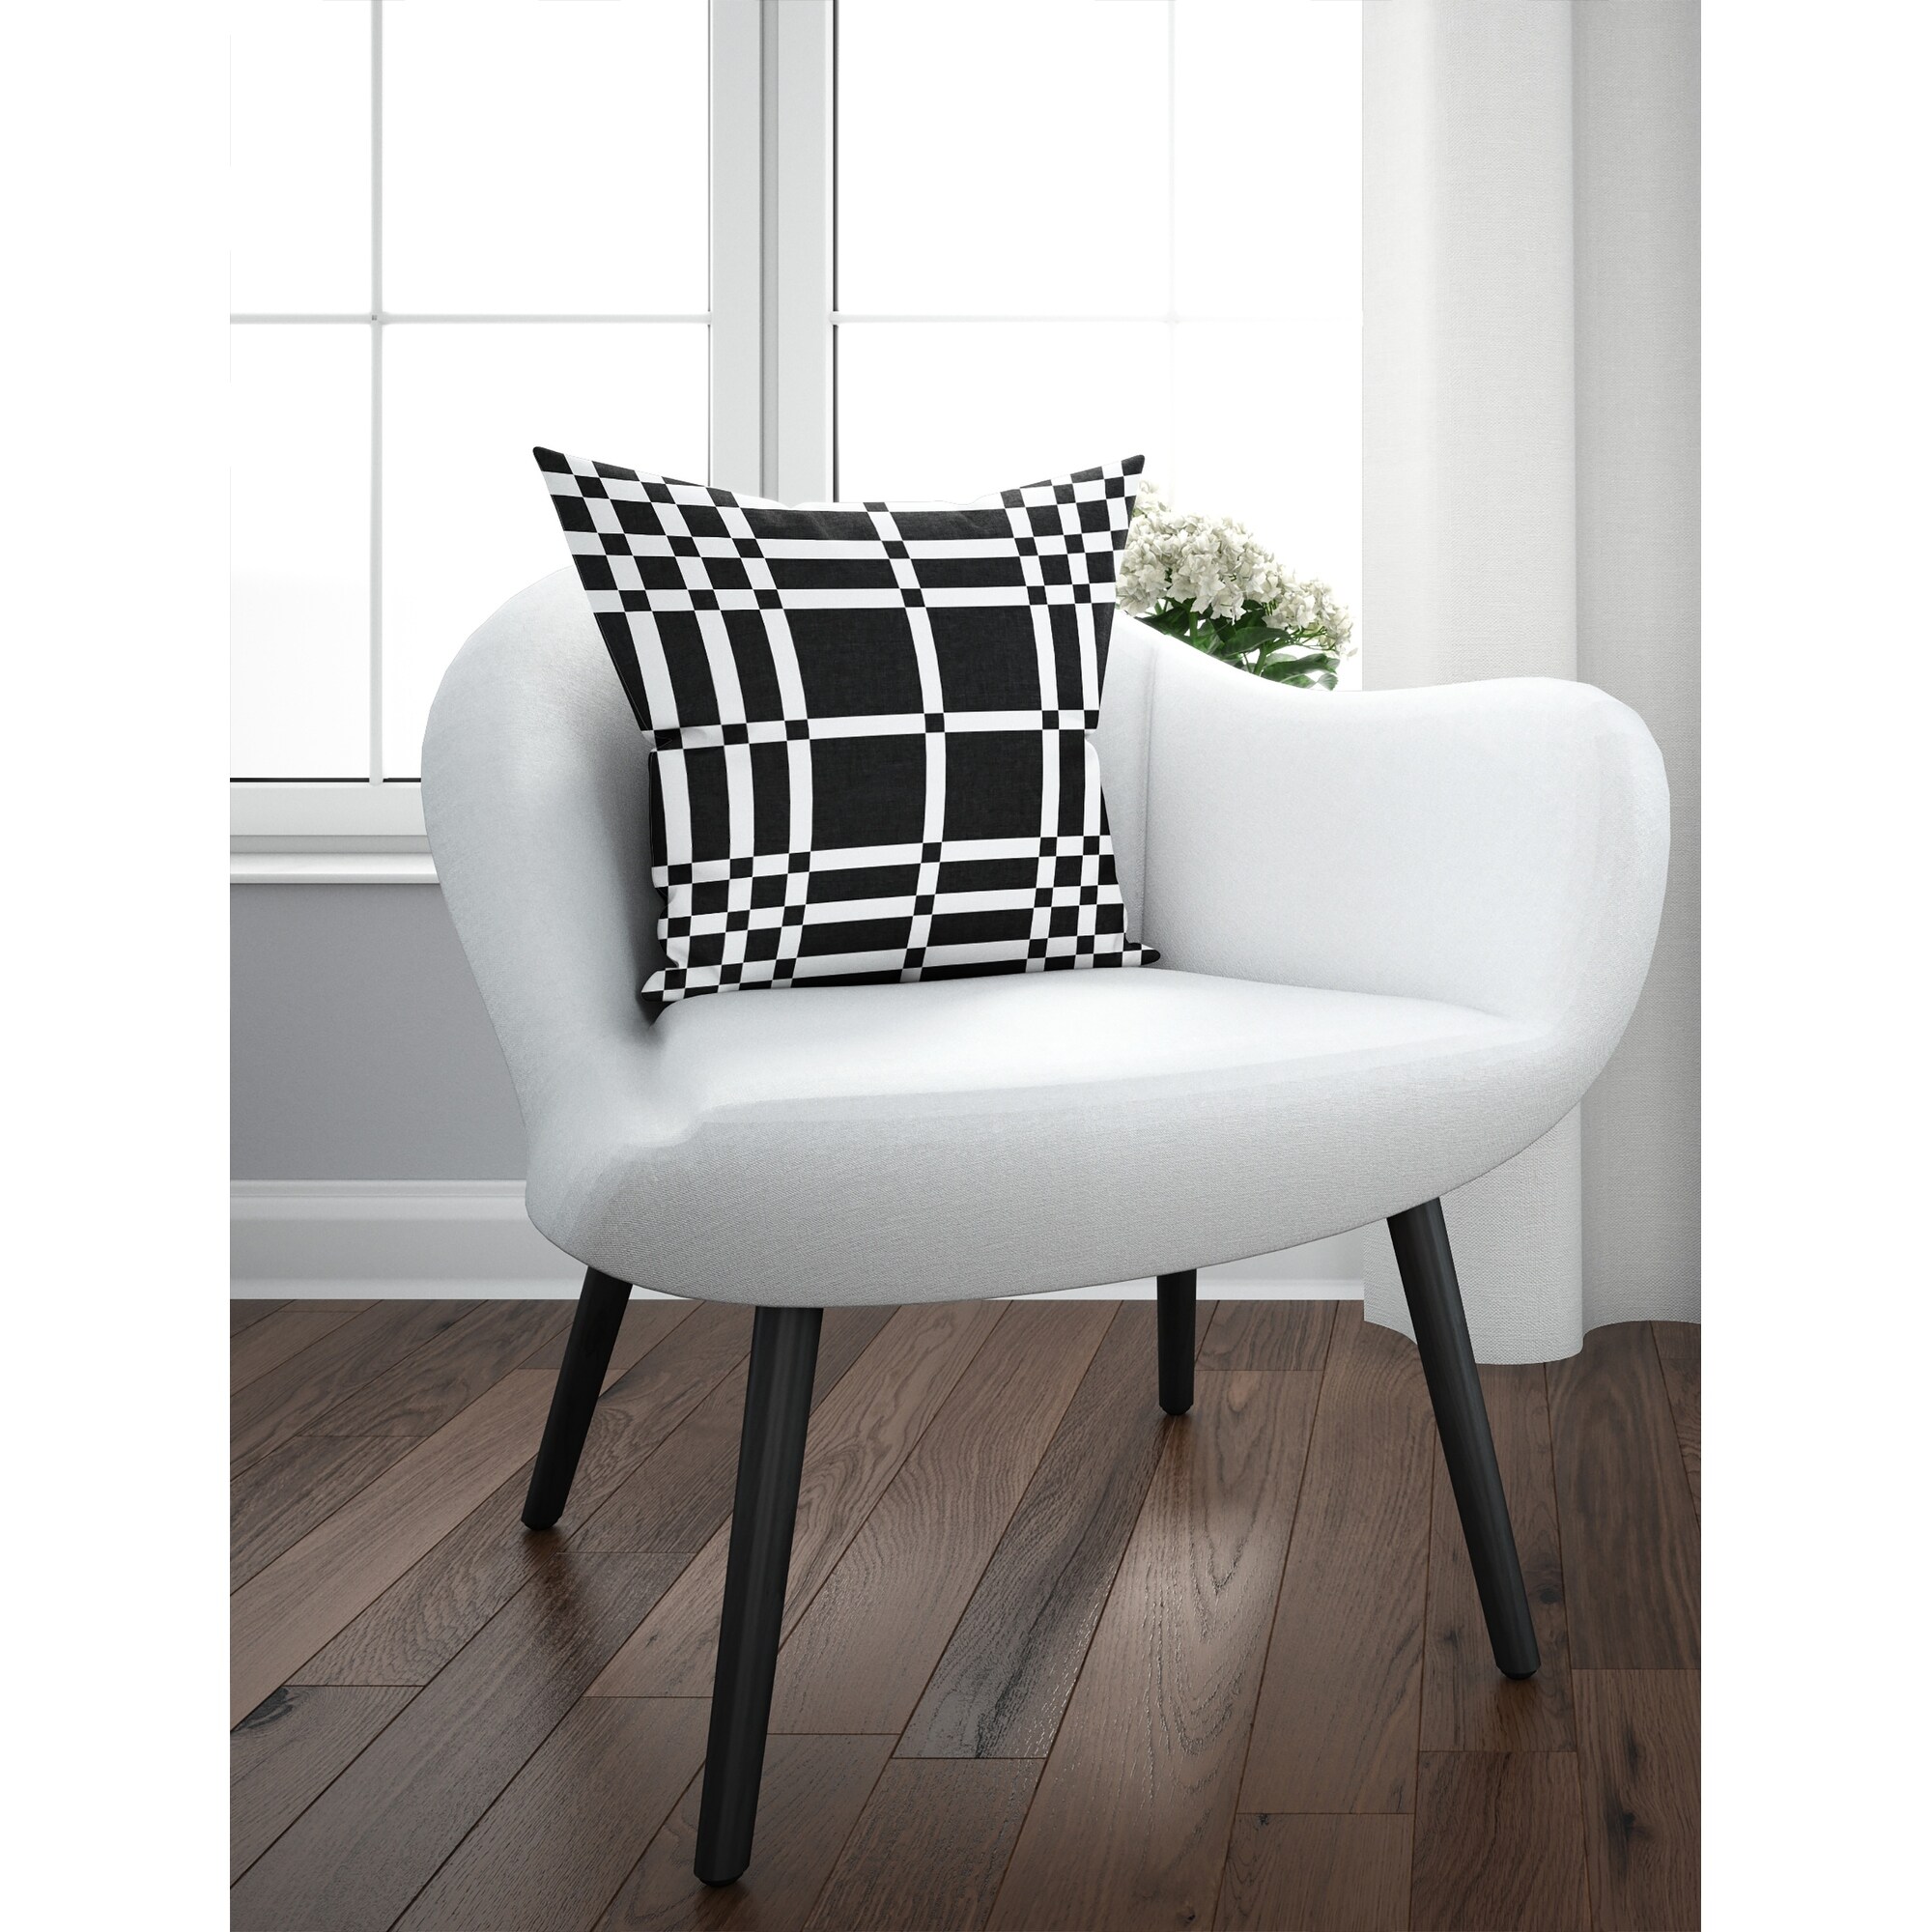 CHECKMATE BLACK & WHITE Accent Pillow By Jackie Reynolds